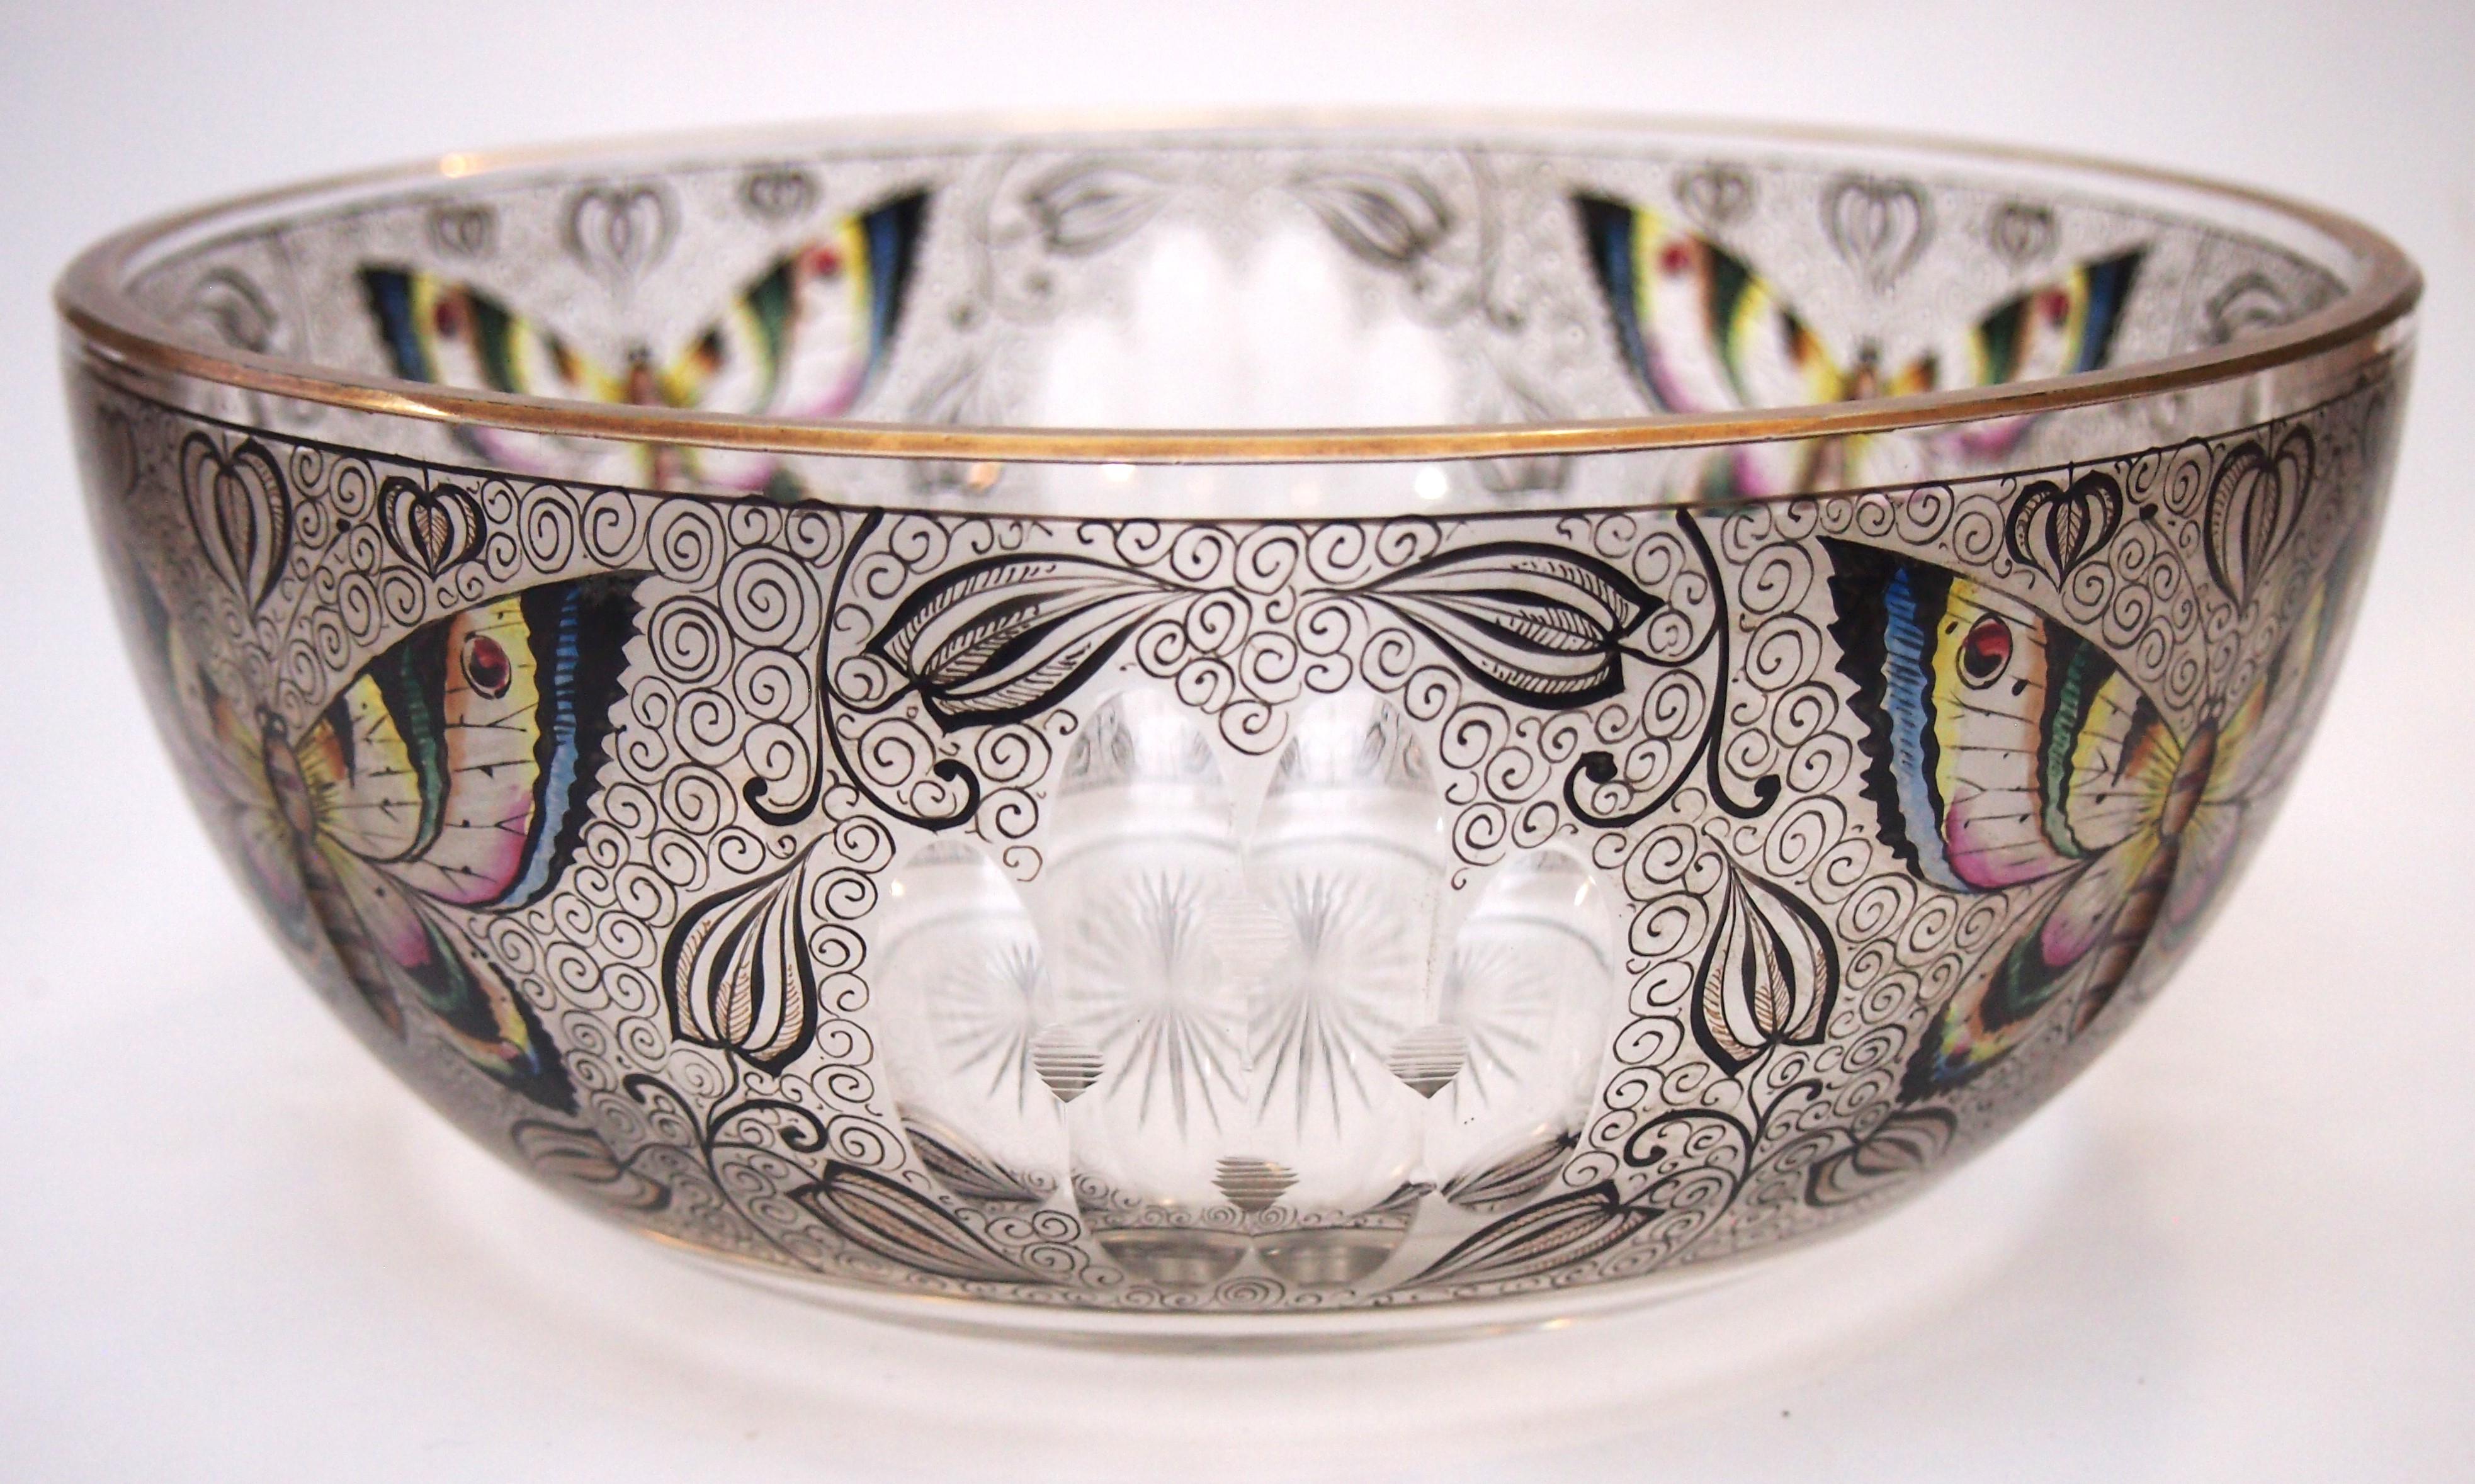 Fabulous Enamelled Butterfly Bowl from Fachschule Haida Glass School In Good Condition For Sale In Worcester Park, GB